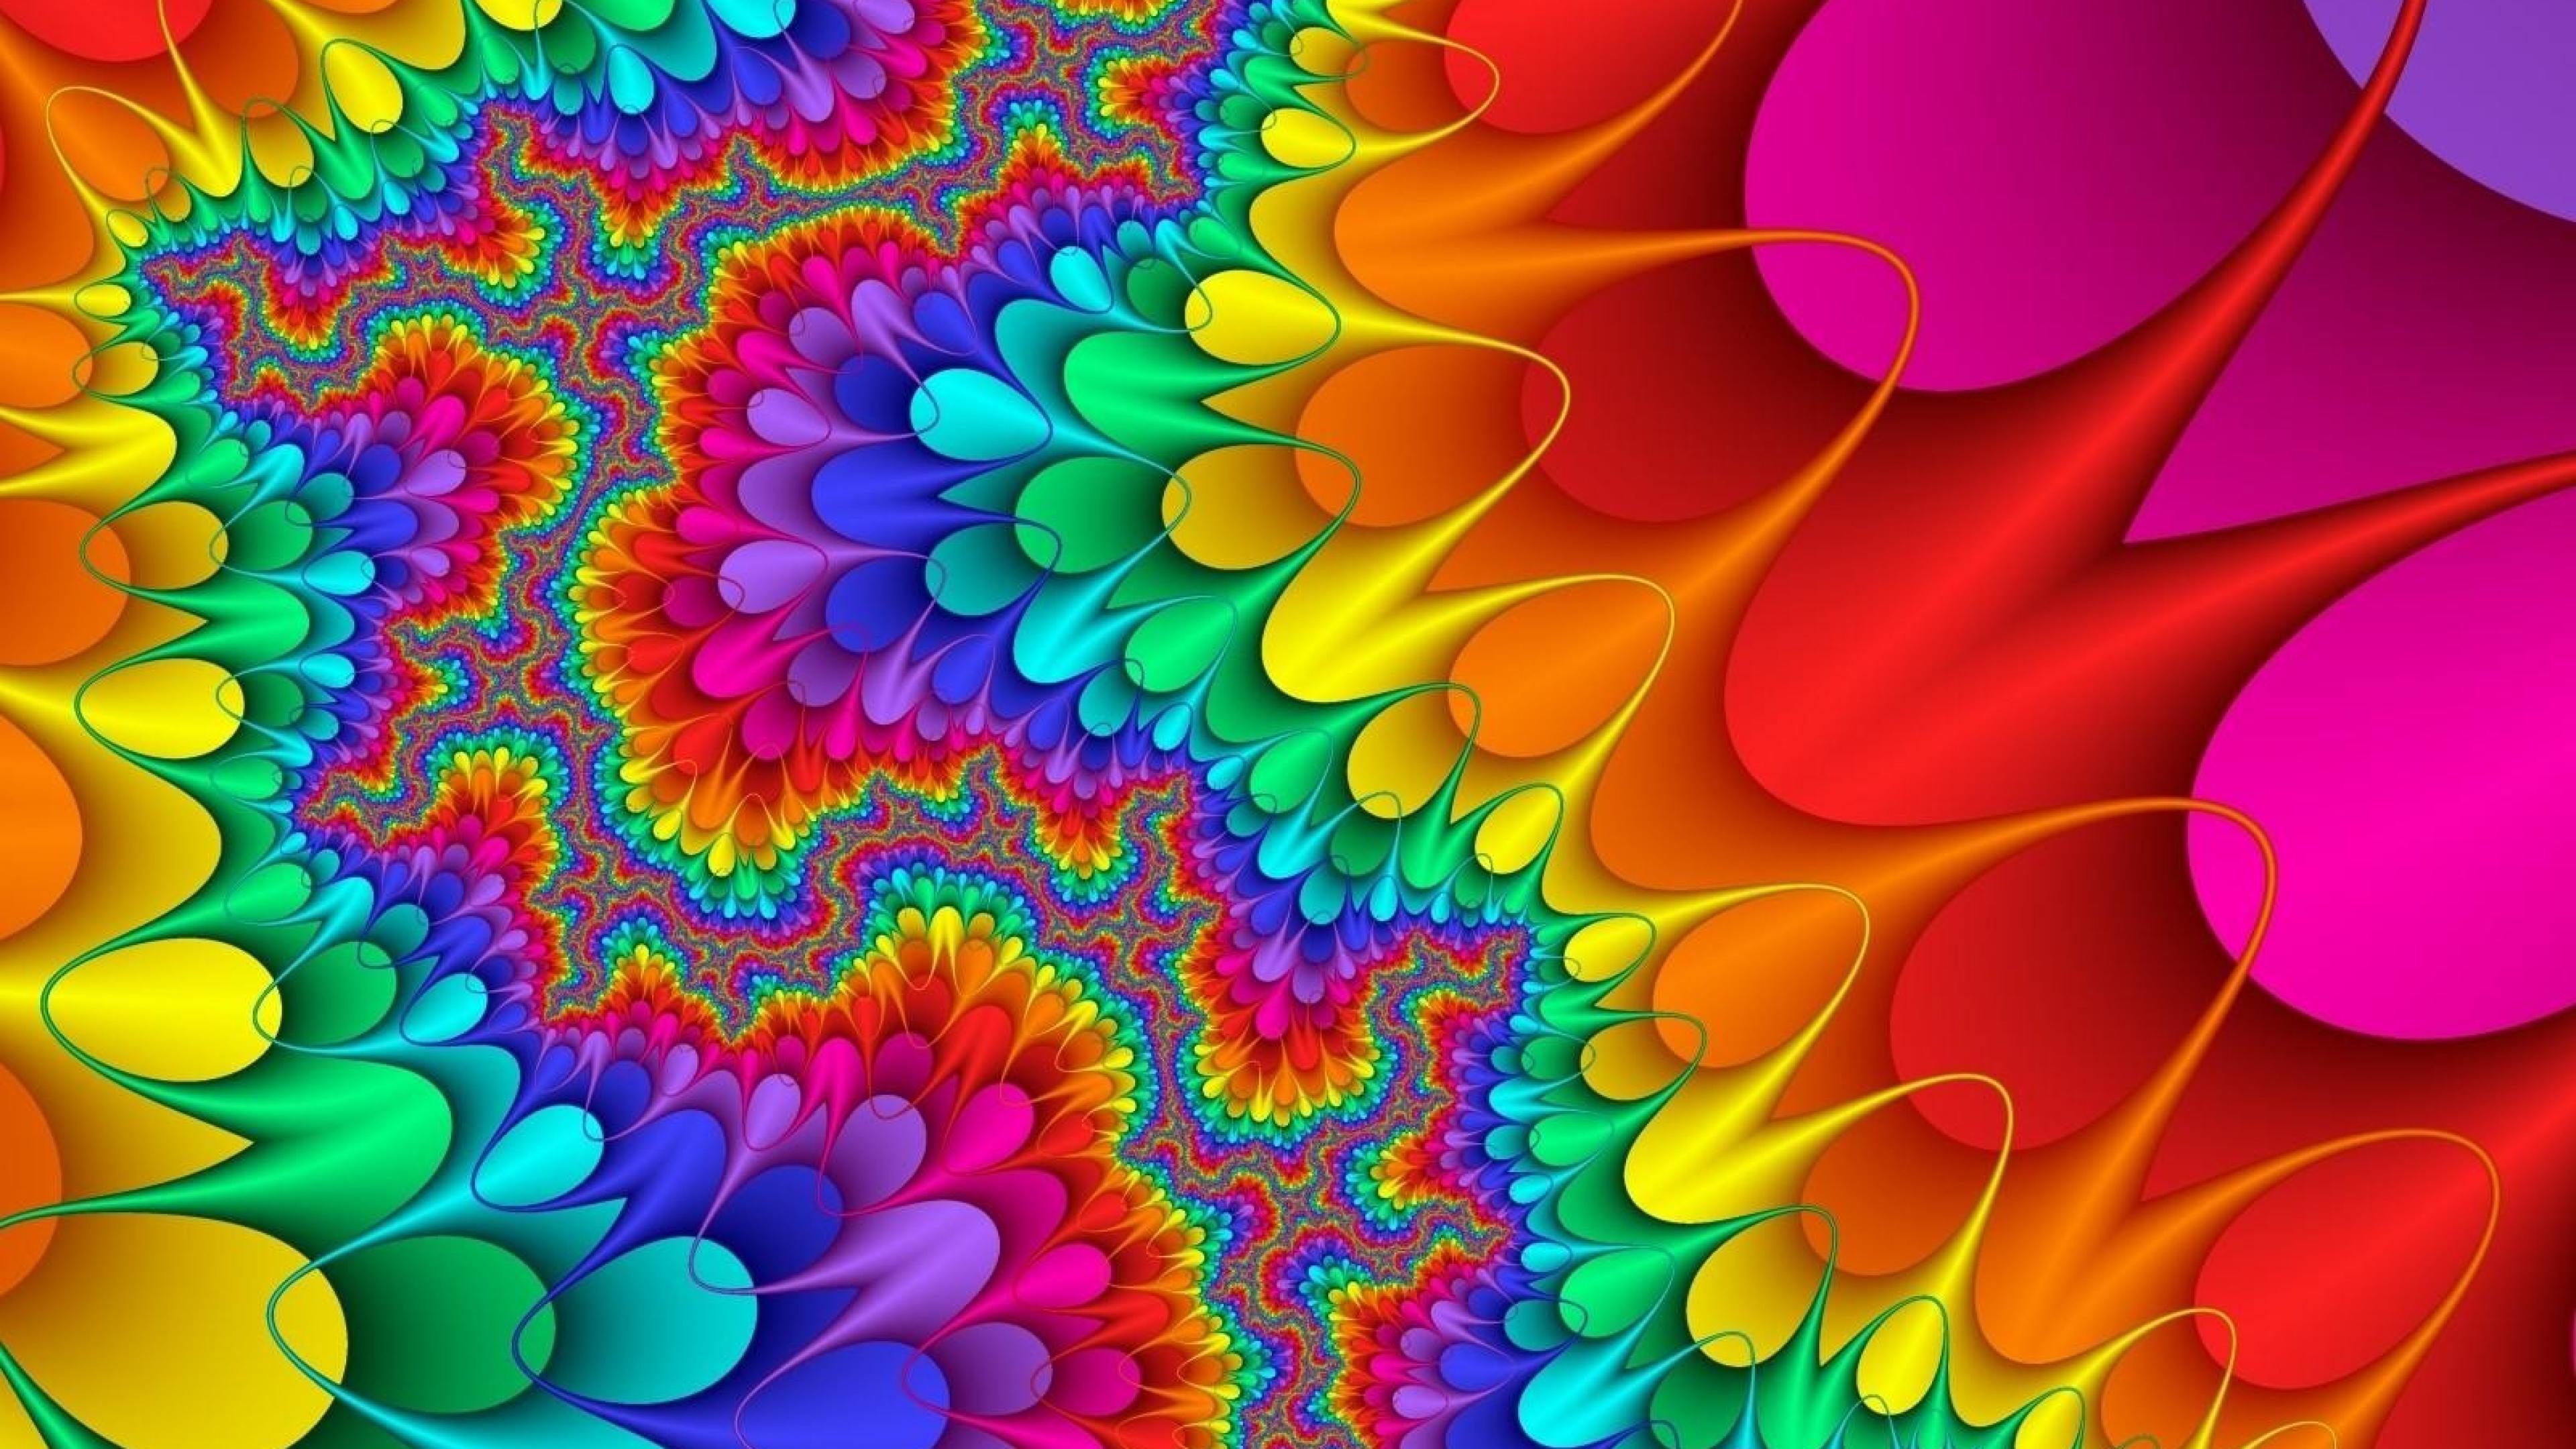 Wallpaper.wiki Abstract Colorful Widescreen 4K Resolution Image